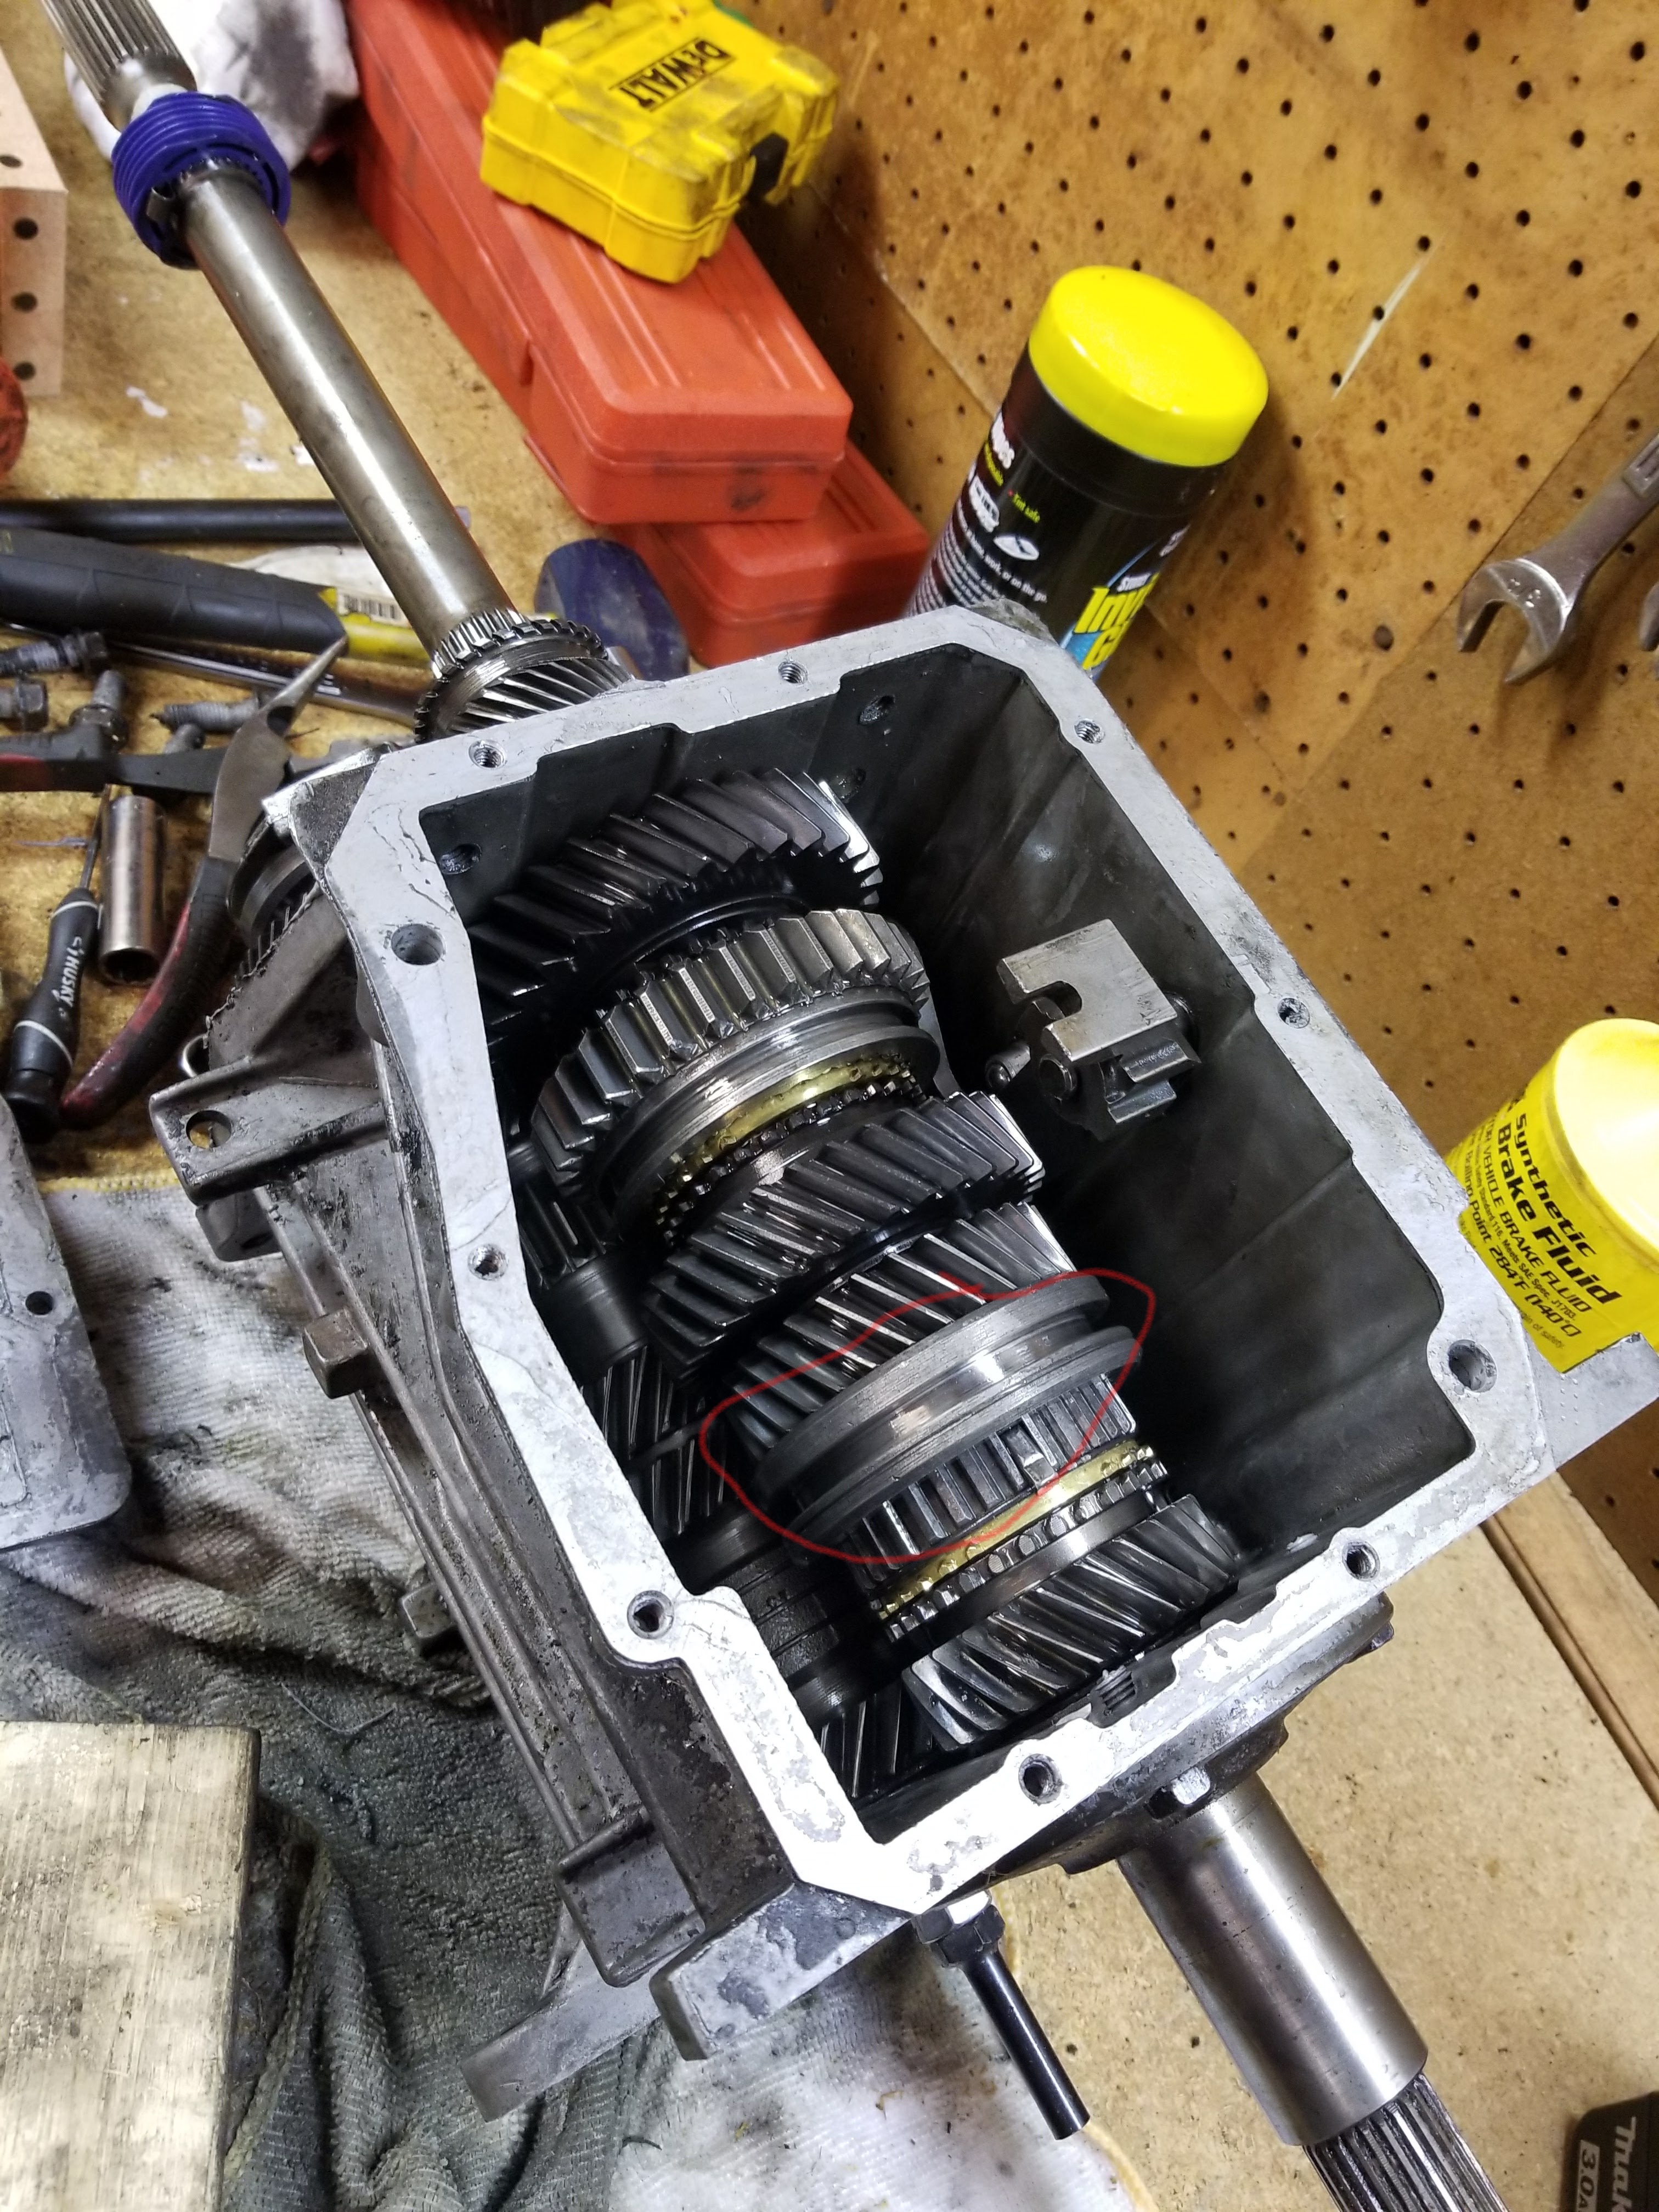 5r110w transmission wont shift out of 1st